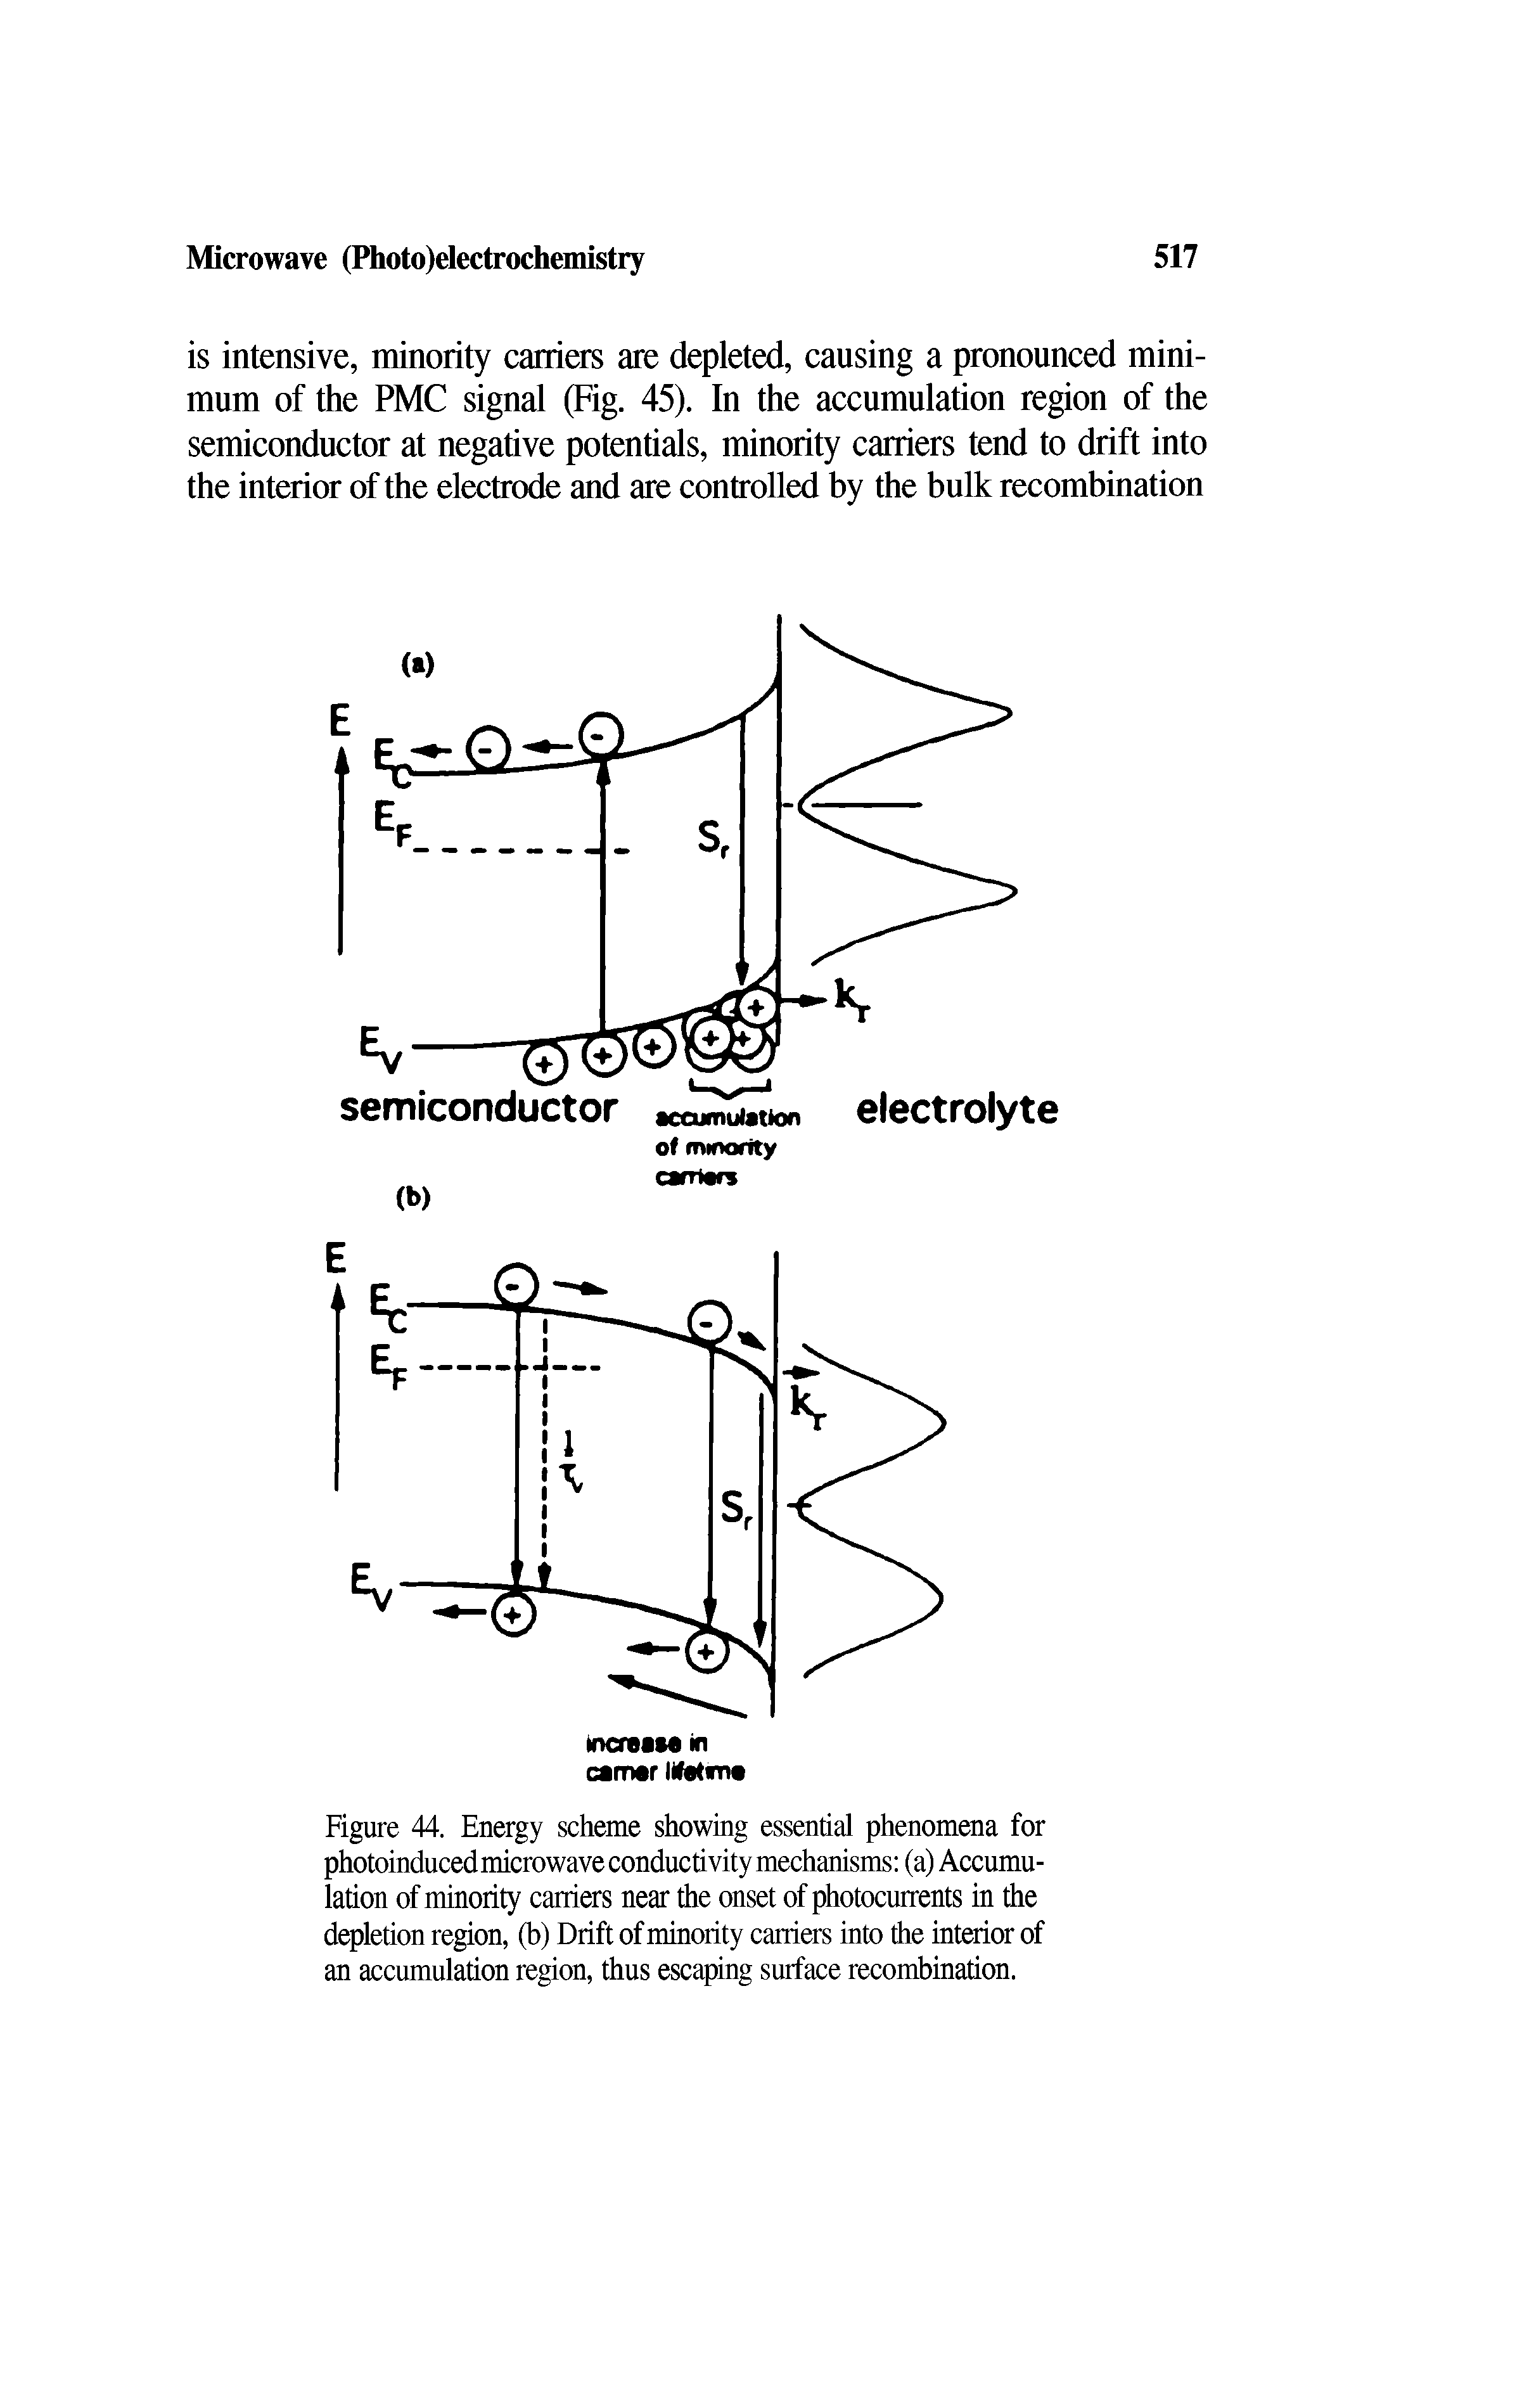 Figure 44. Energy scheme showing essential phenomena for photoinduced microwave conductivity mechanisms (a) Accumulation of minority carriers near the onset of photocurrents in the depletion region, (b) Drift of minority carriers into the interior of an accumulation region, thus escaping surface recombination.